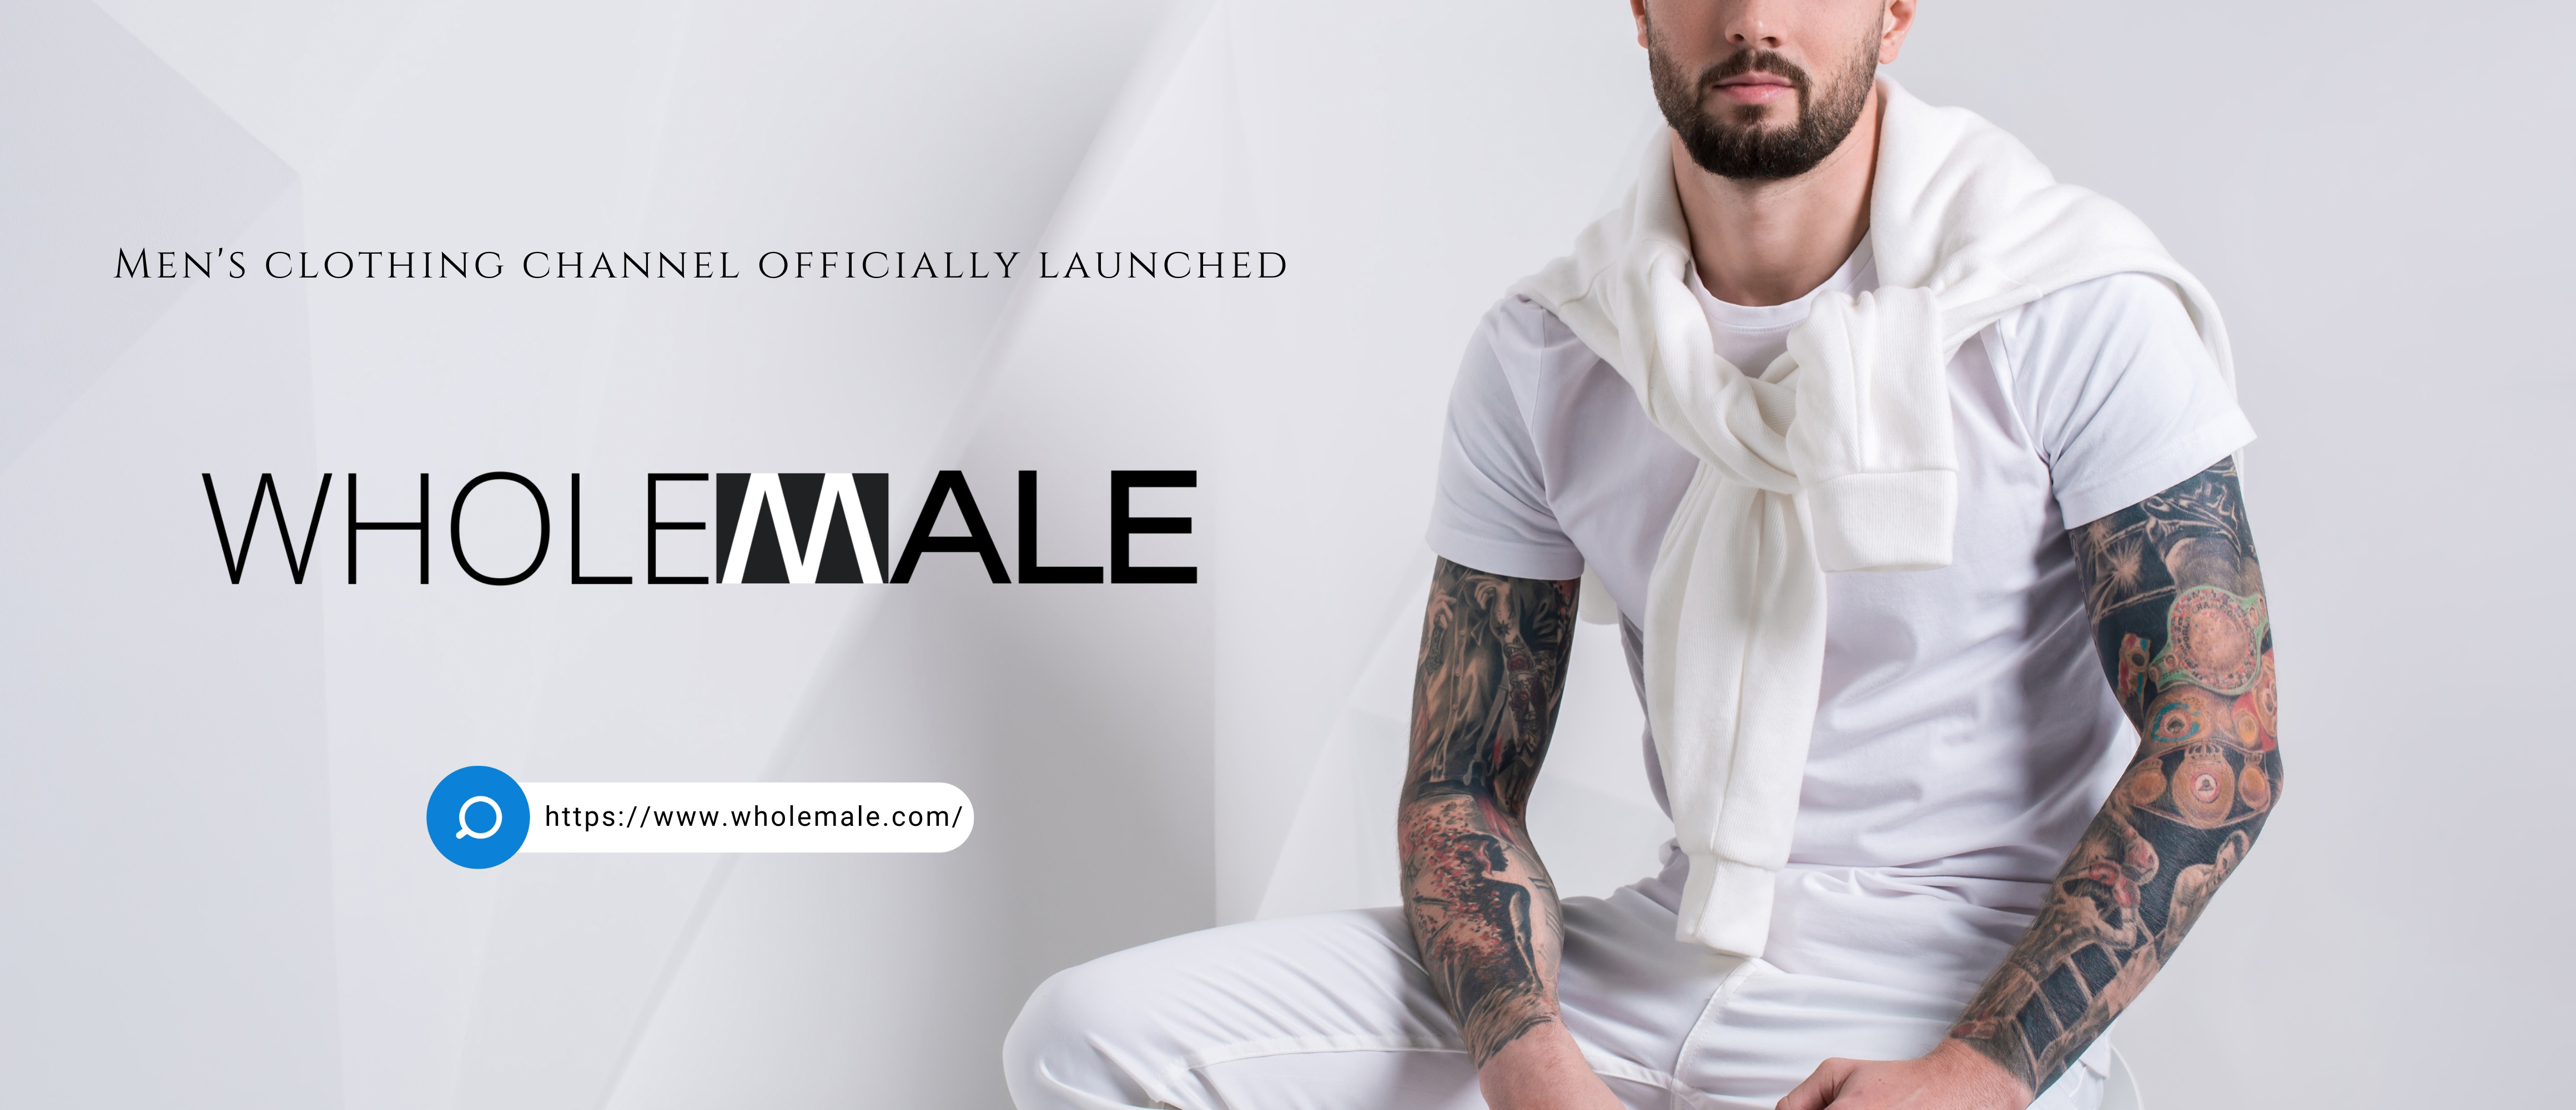 Men's clothing channel officially launched